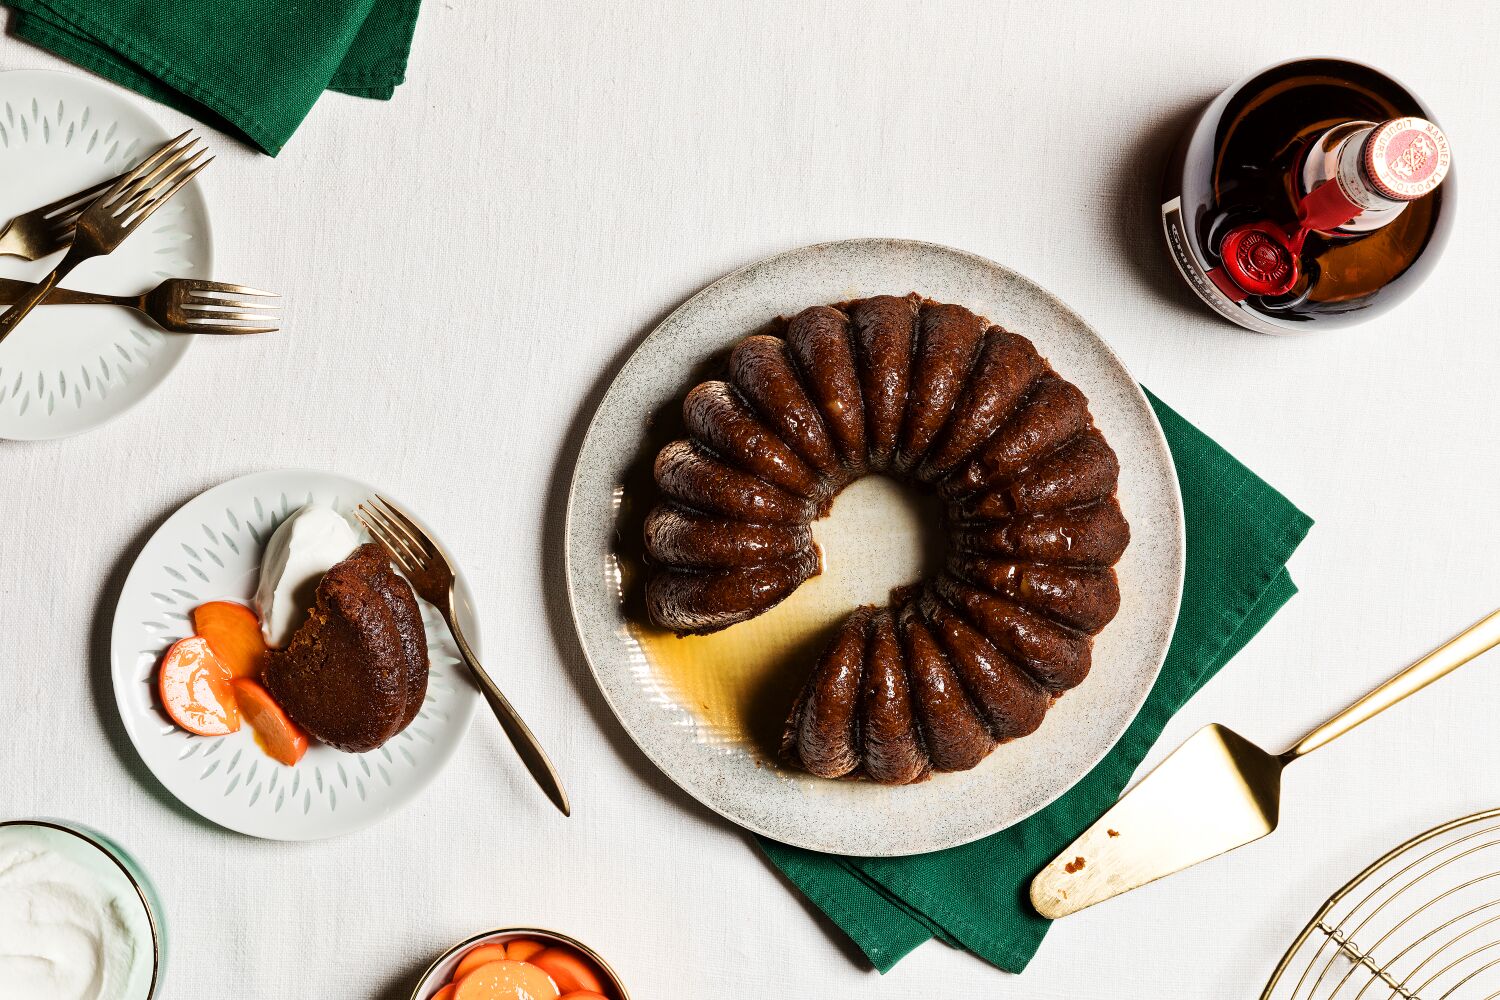 Warm Persimmon Cake With Orange and Olive Oil